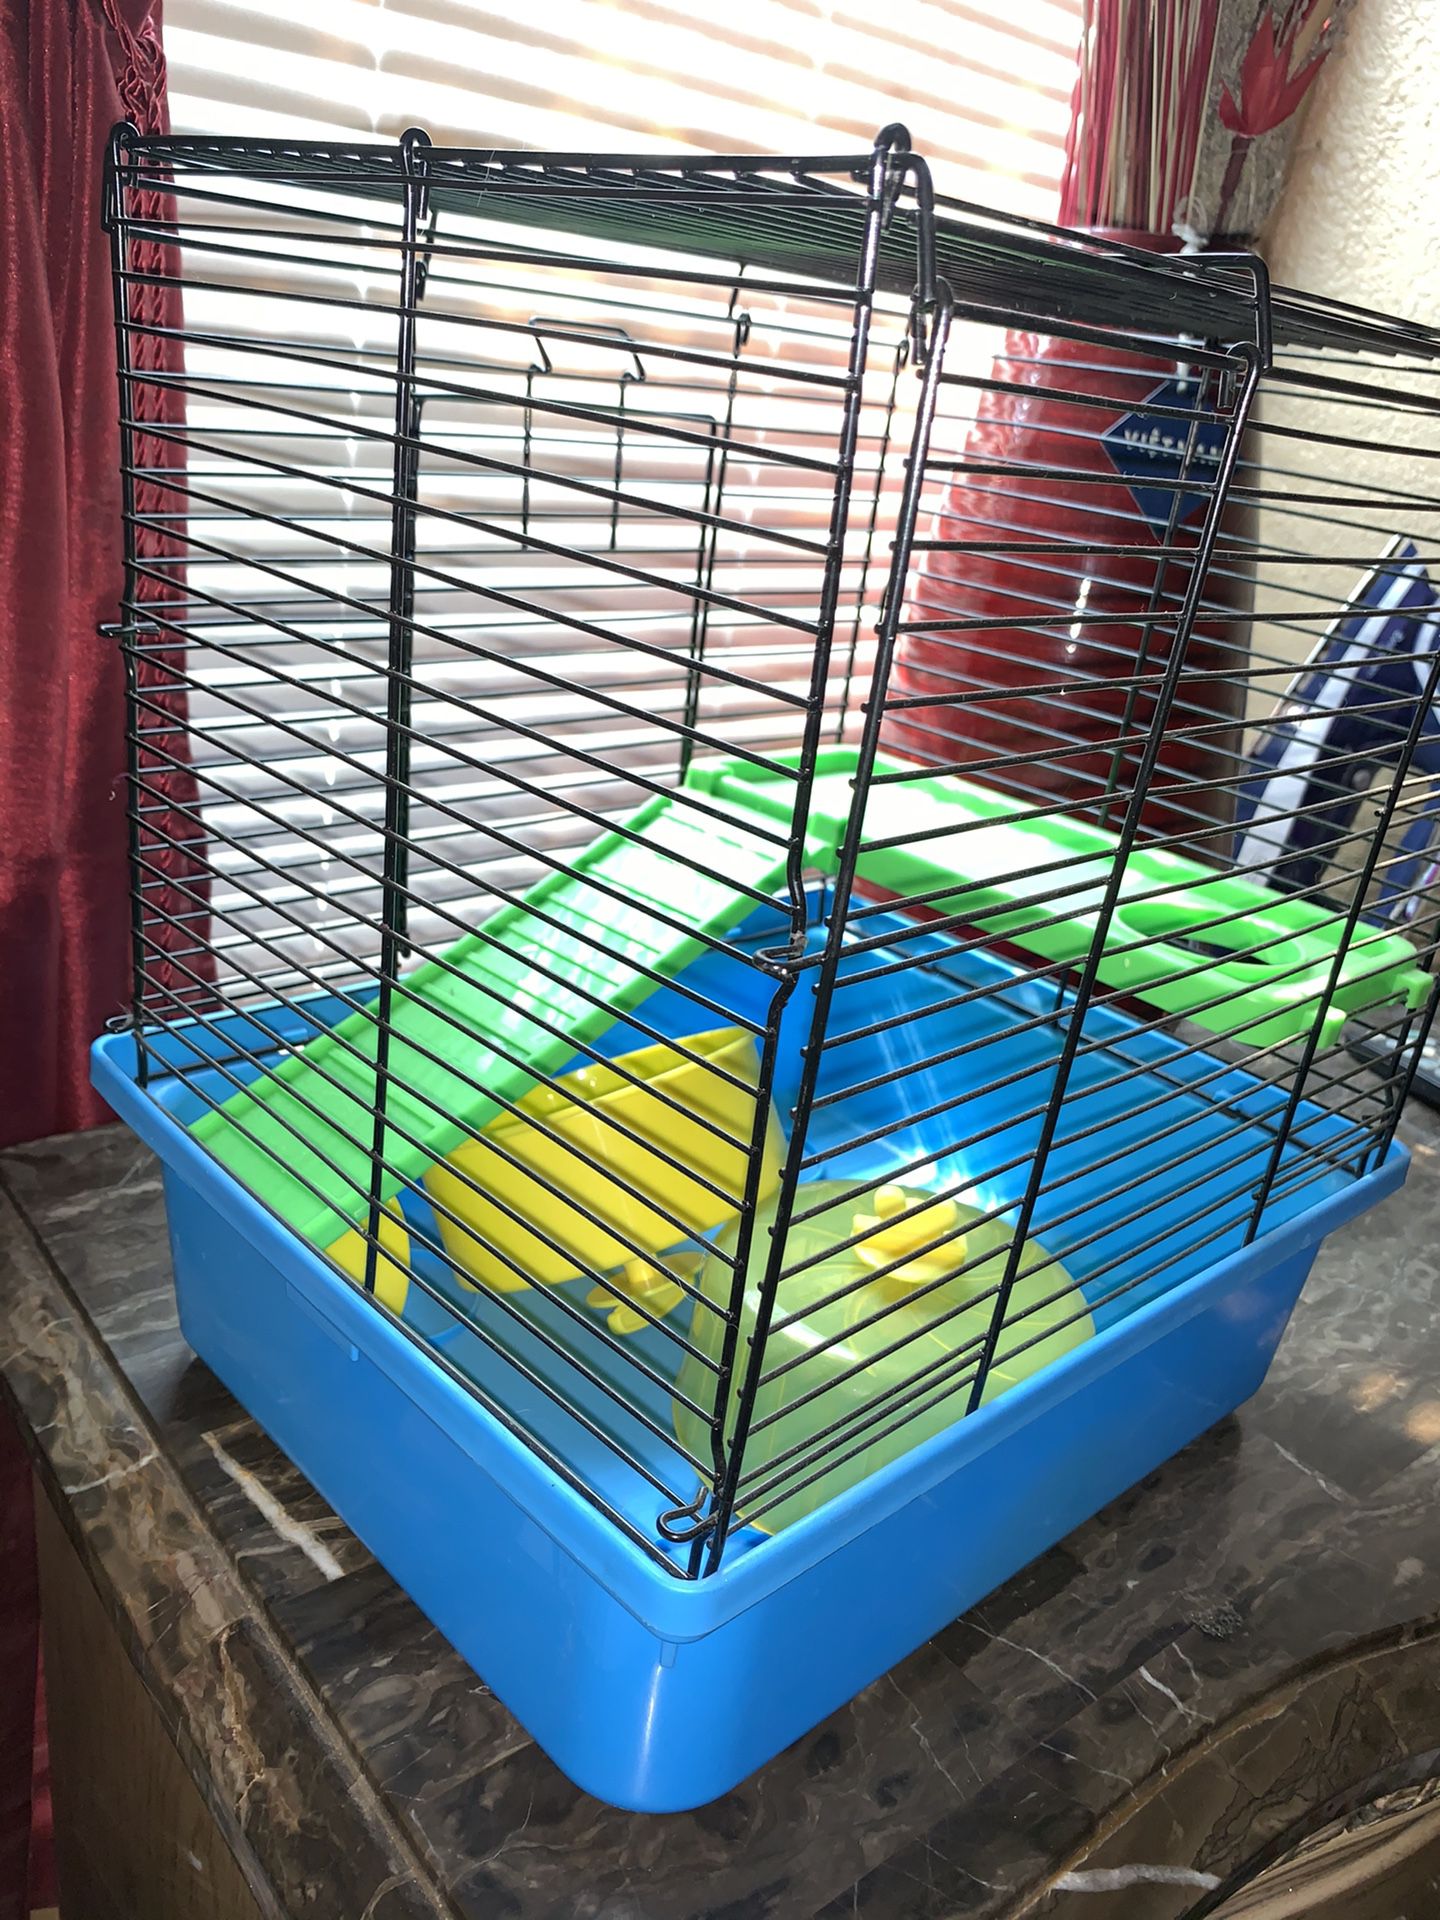 Hamster/Bunny Cage